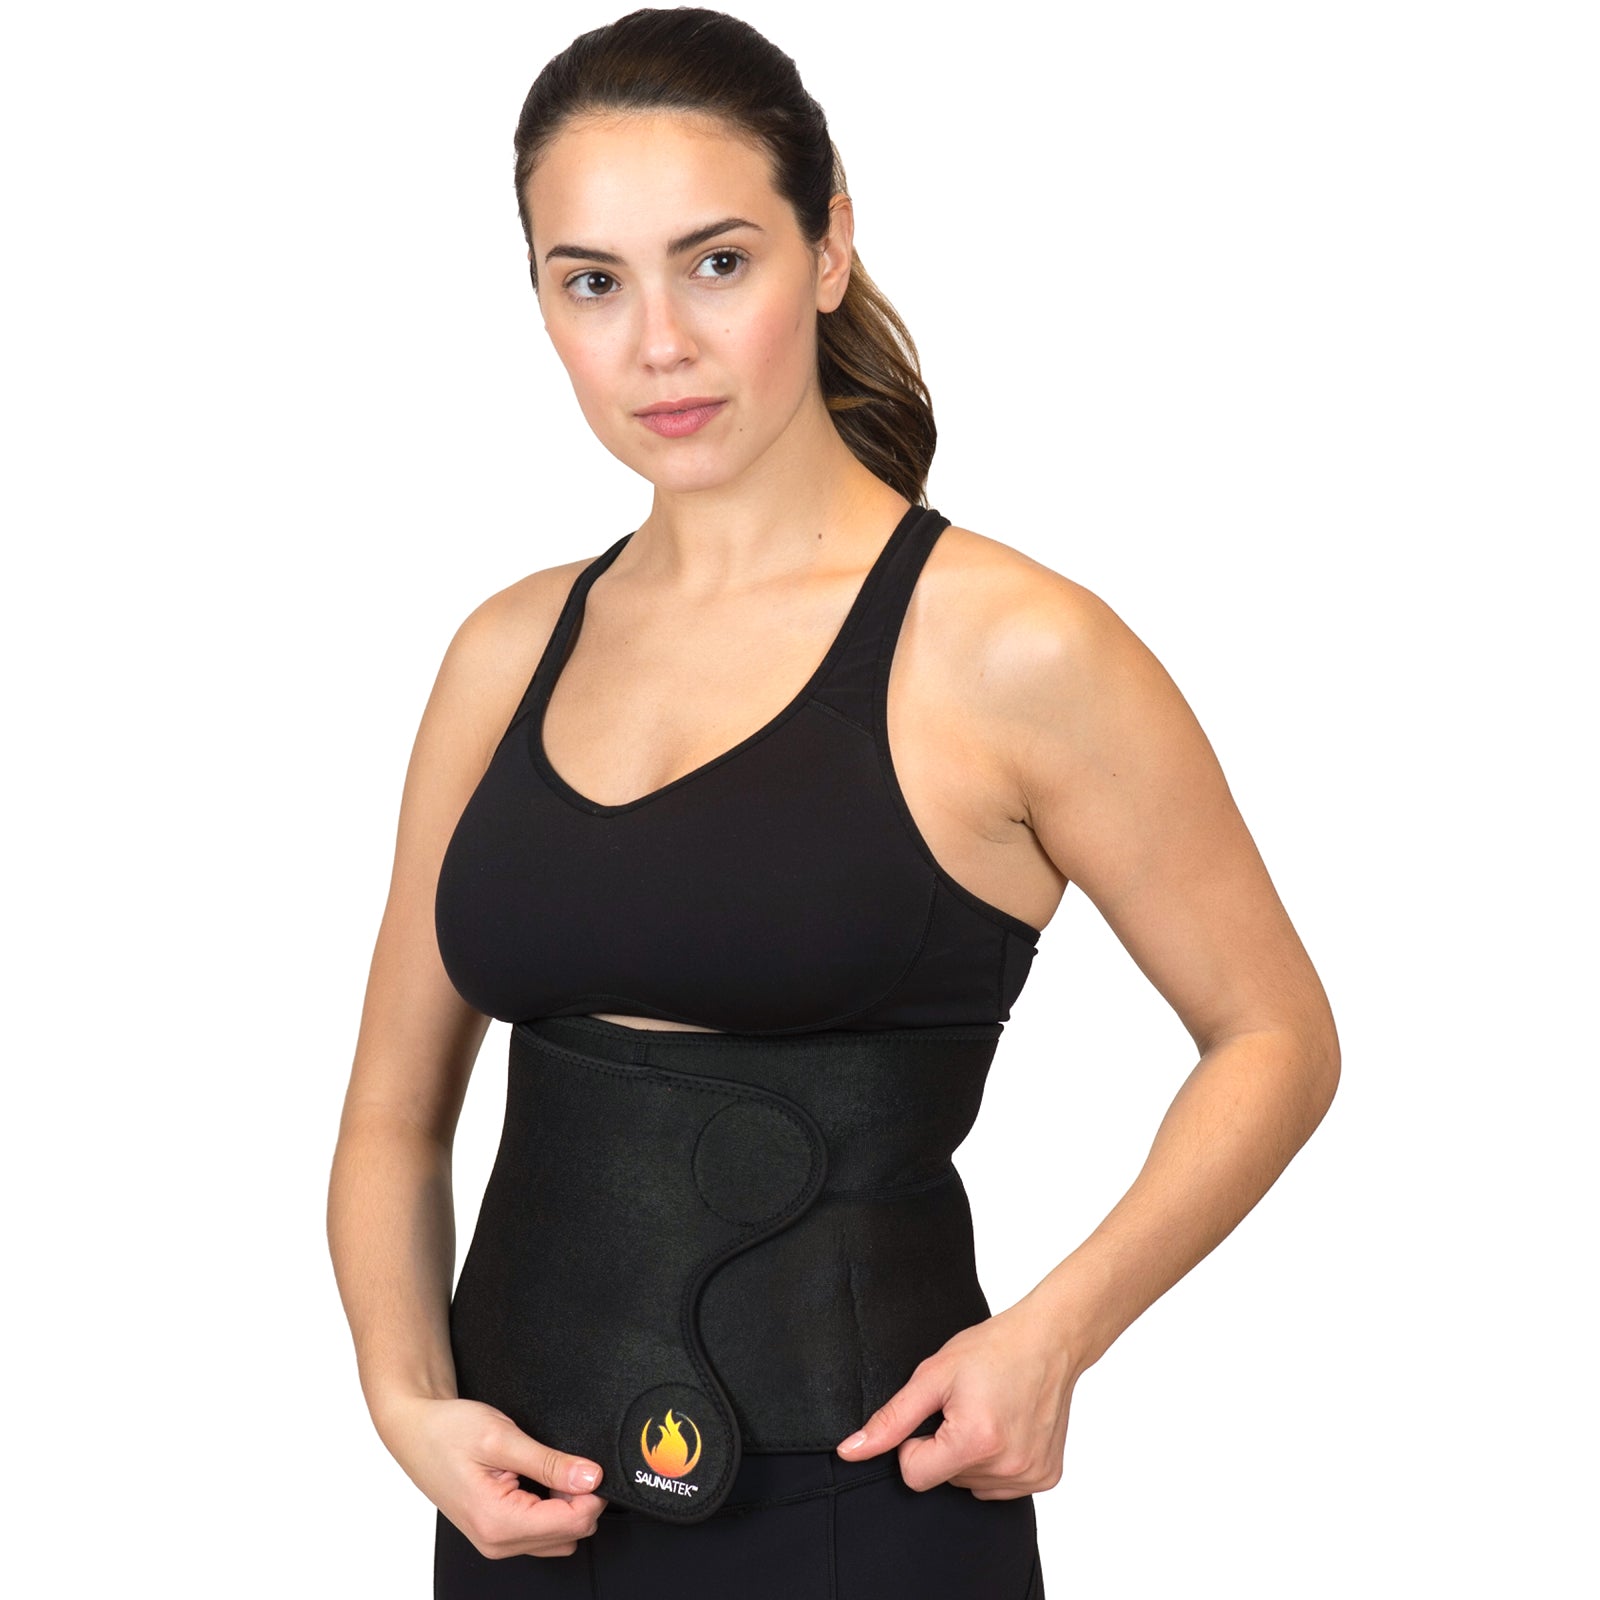 Manual Polyester Shaper Belt Non-Tearable Tummy Trimmer Slimming